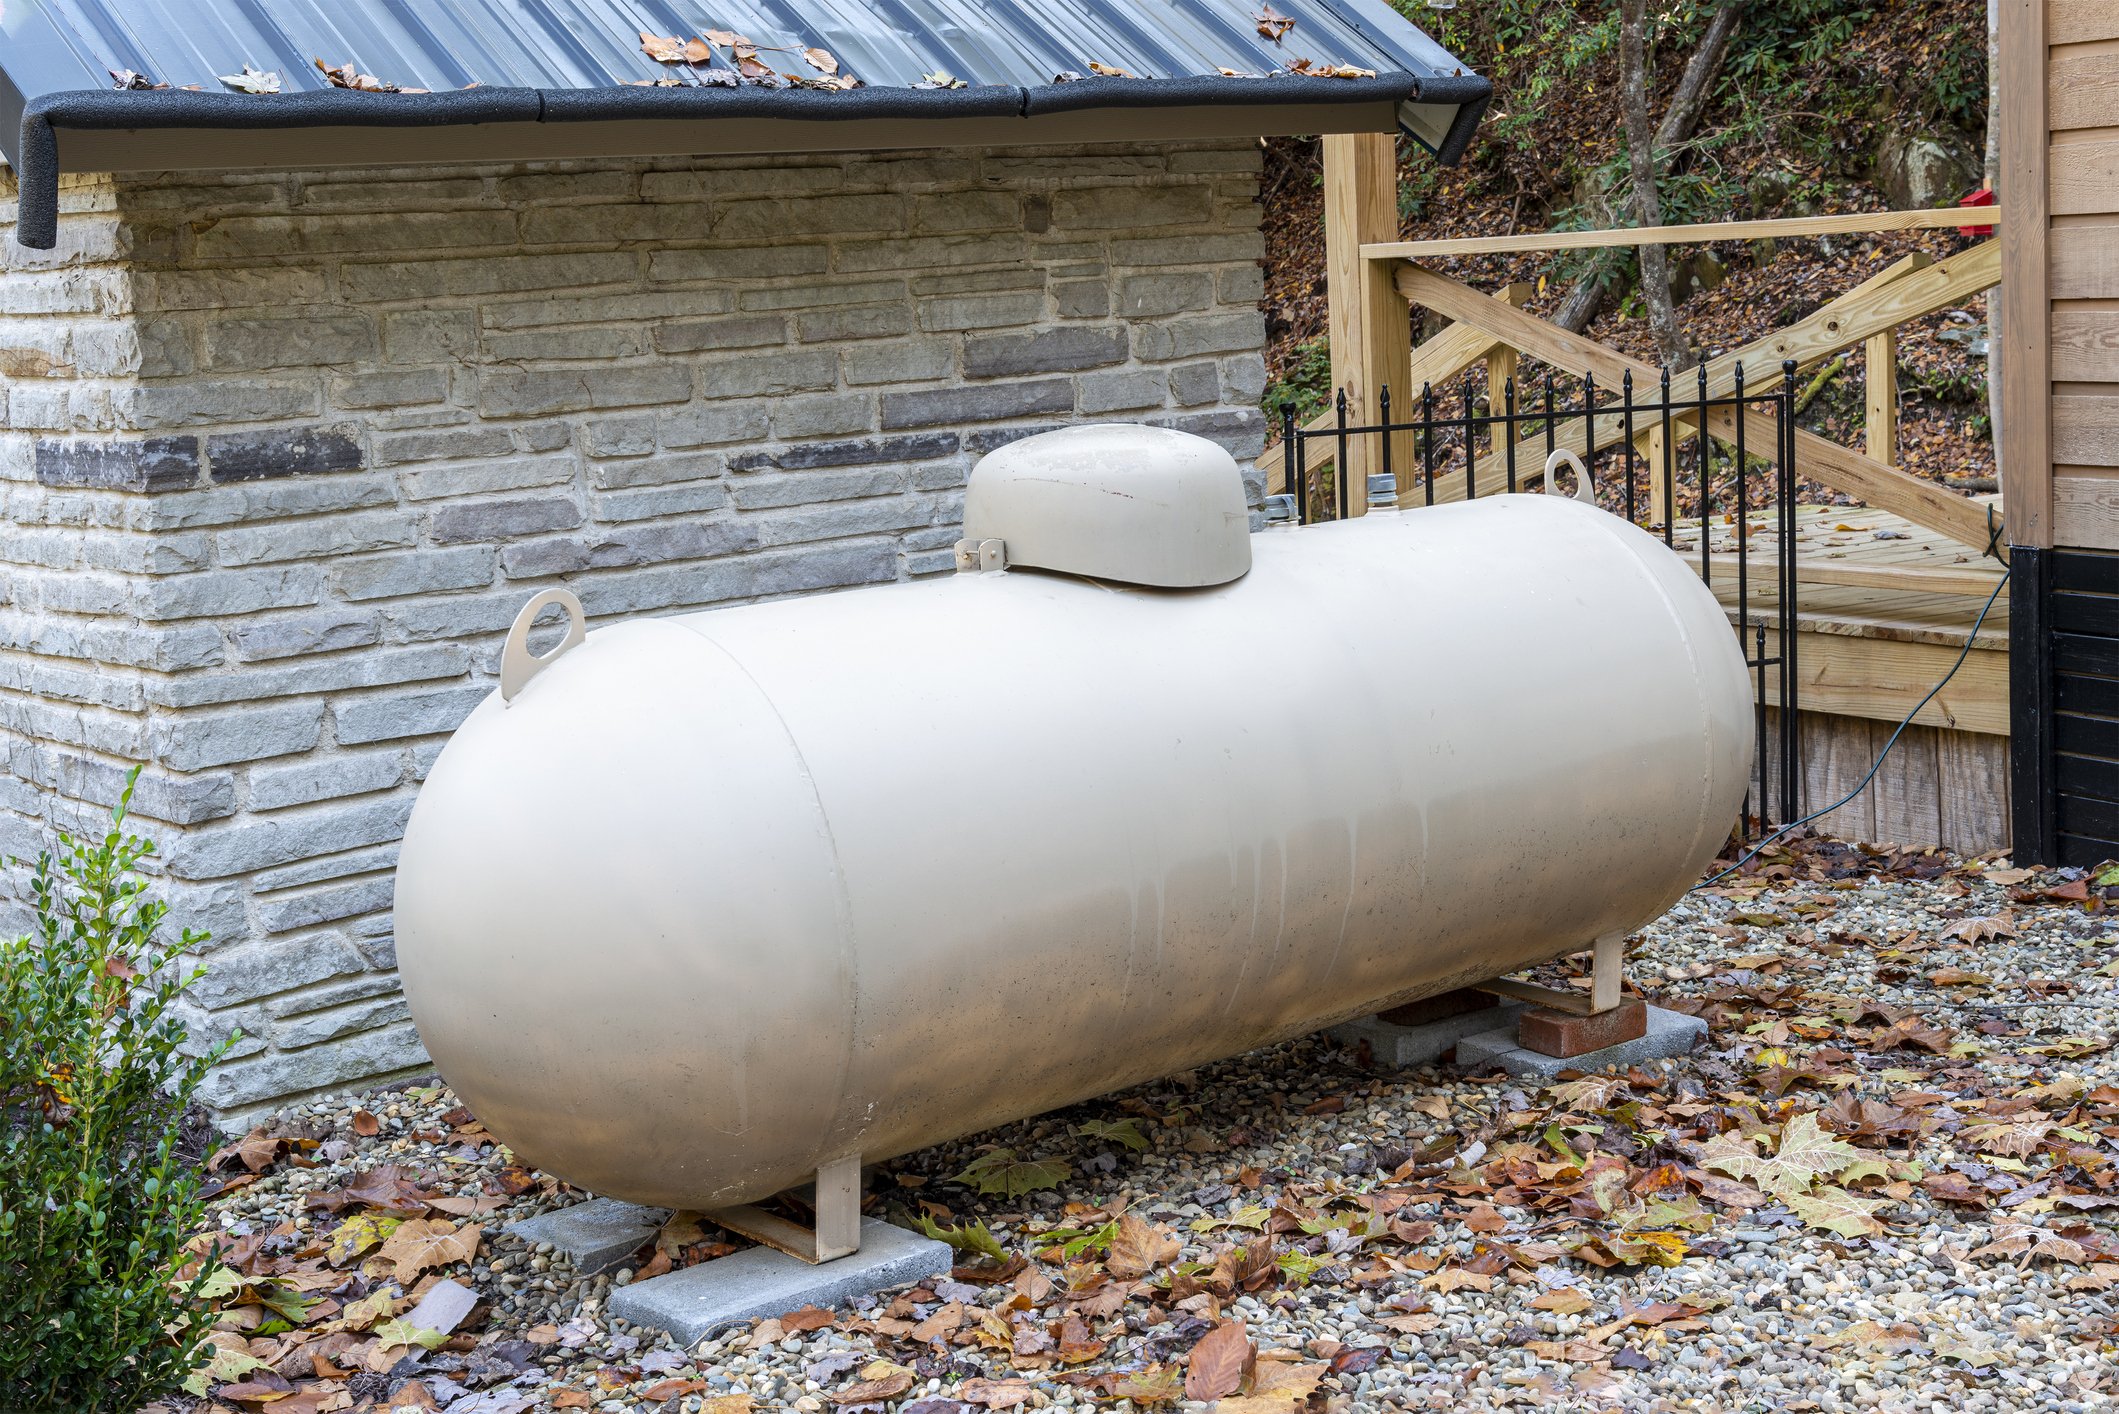 If you are a South Carolina propane customer of AmeriGas or Blue Flame and have been harmed by empty tanks and delivery failures call our attorneys at 843-720-2800.